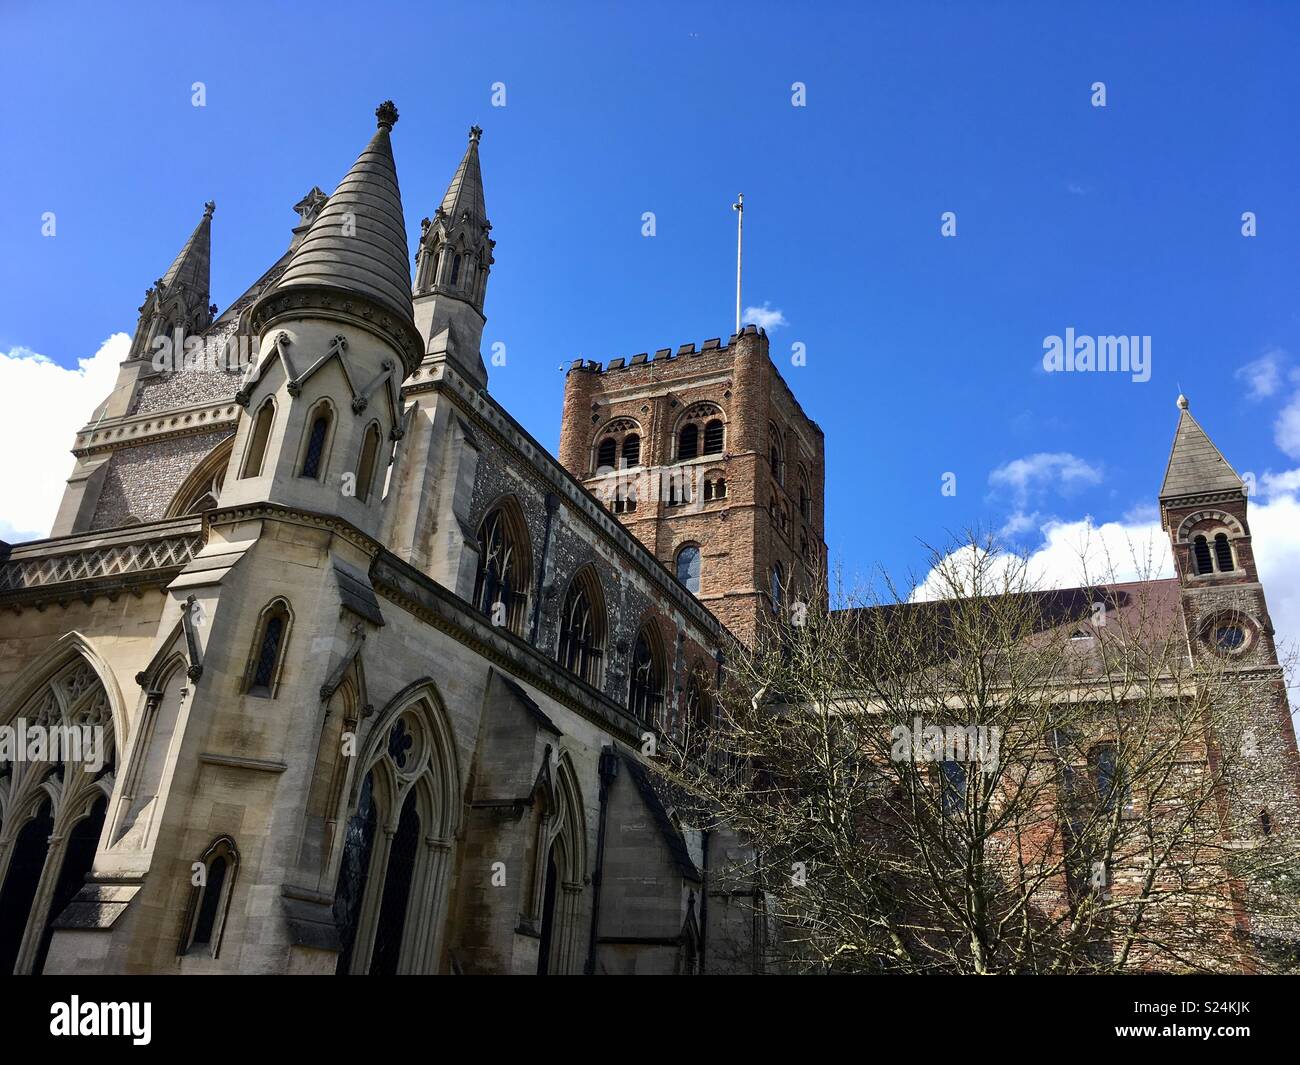 St Albans Cathedral/Abbey with tower and blue skies. Stock Photo